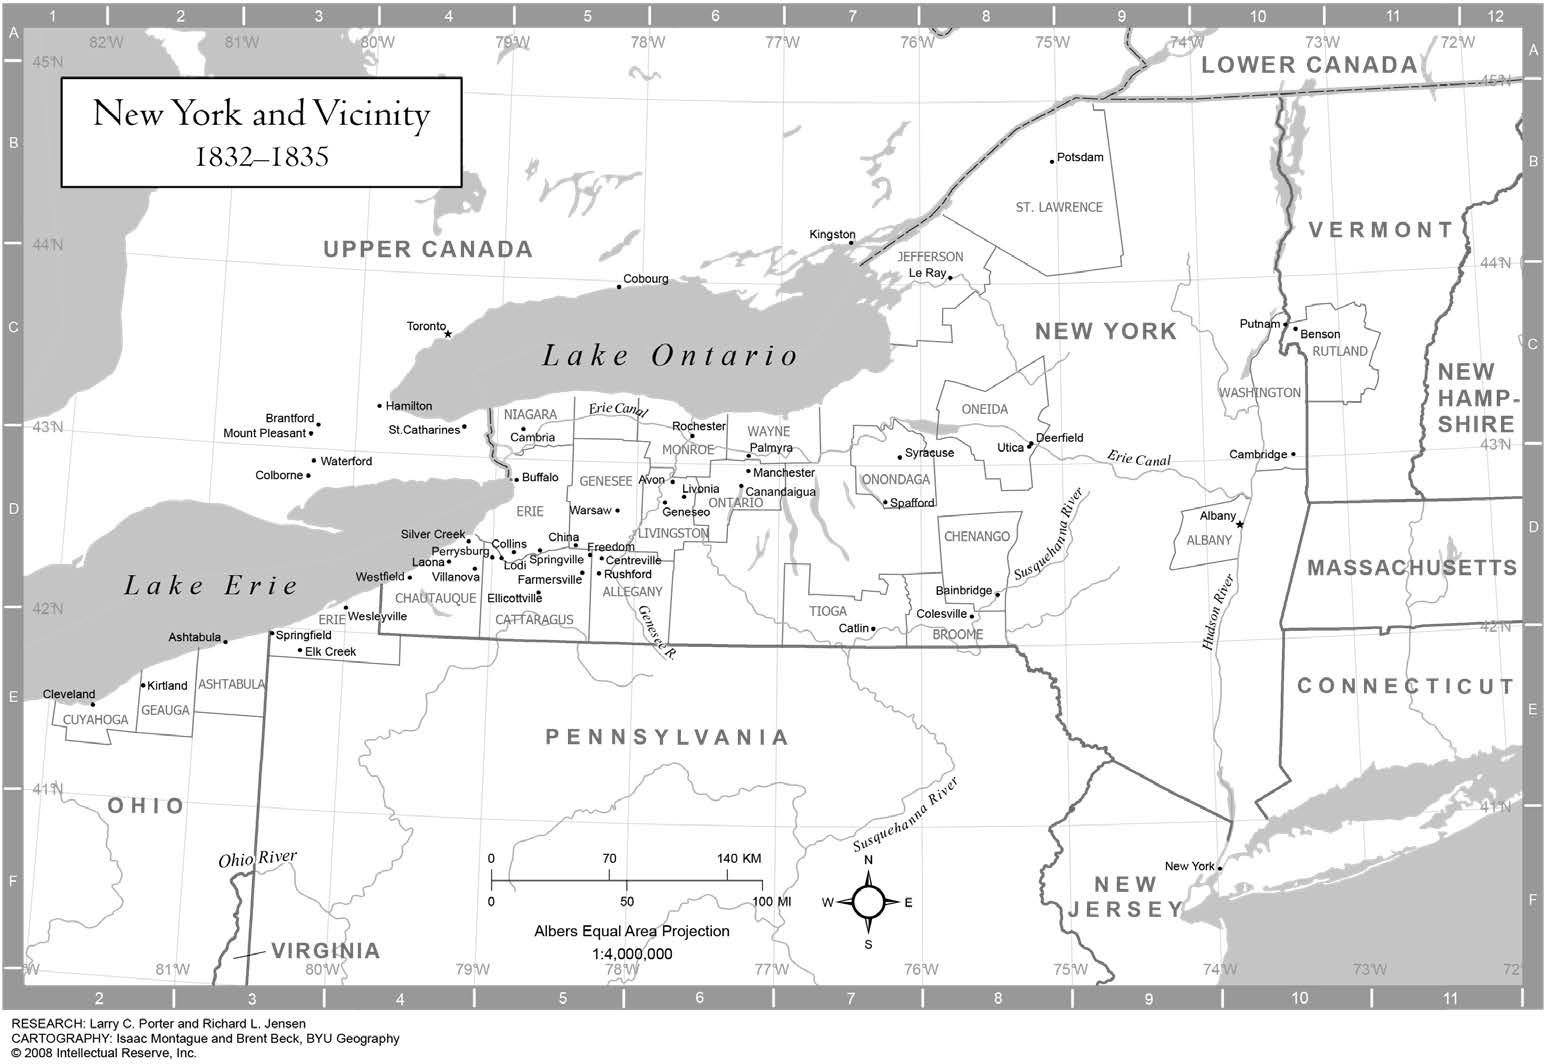 New York and Vicinity, 1832–1835. Courtesy of the Joseph Smith Papers Project.